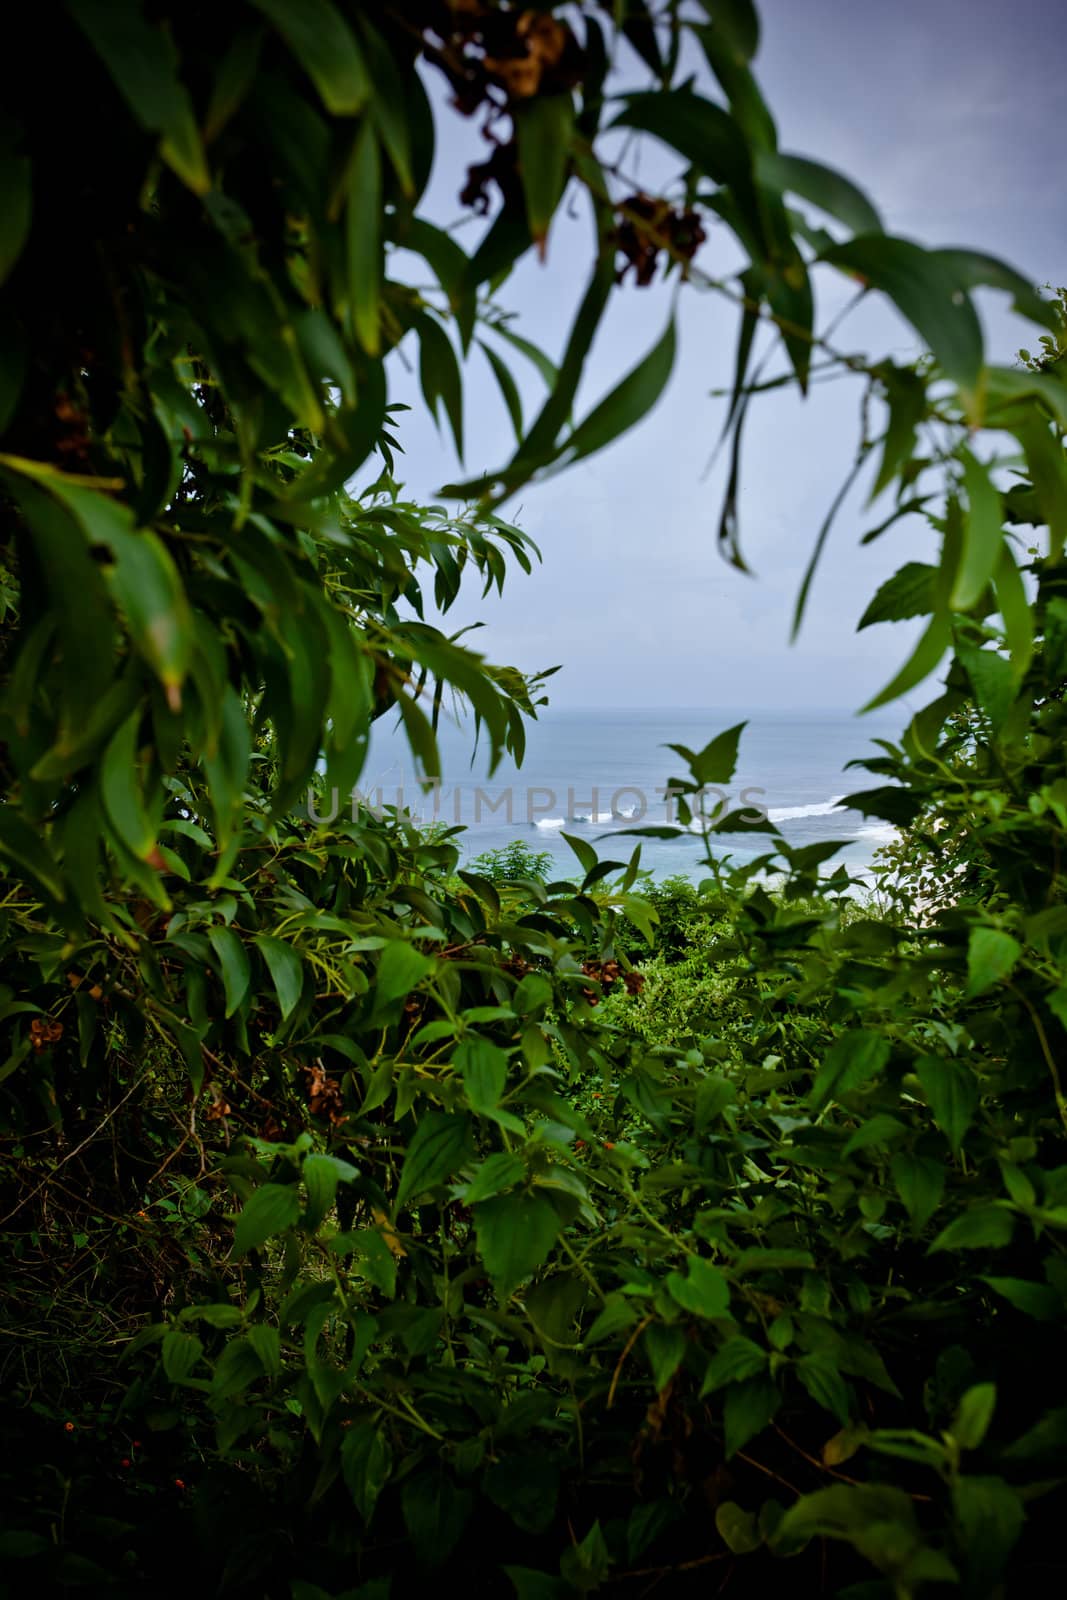 Ocean view through lush tropical greenery by jrstock